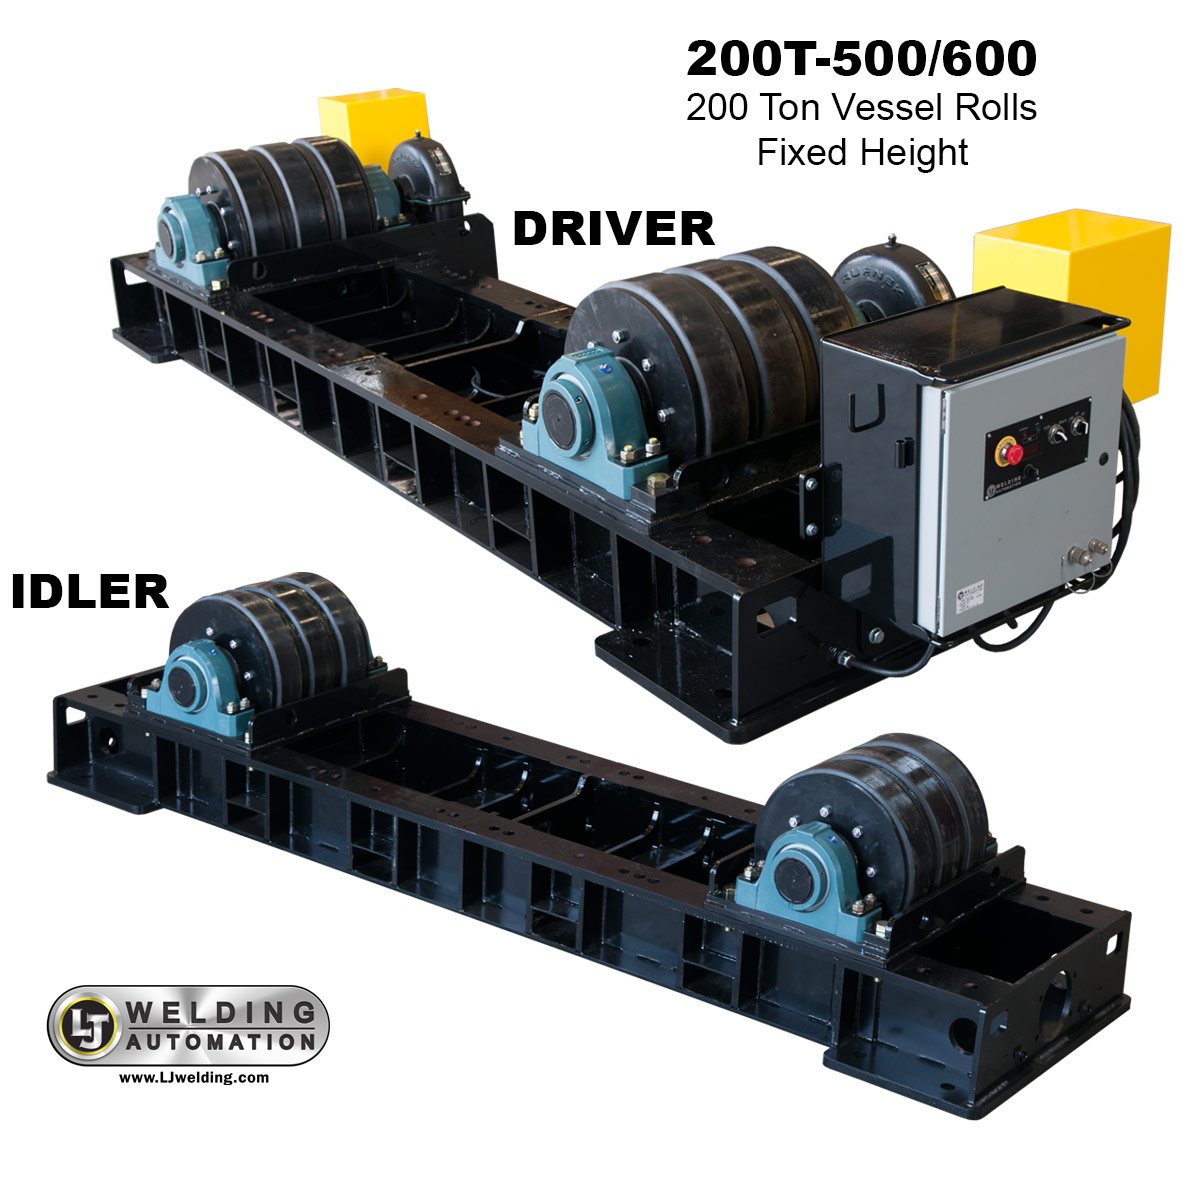 200T-500-600 turning rollers